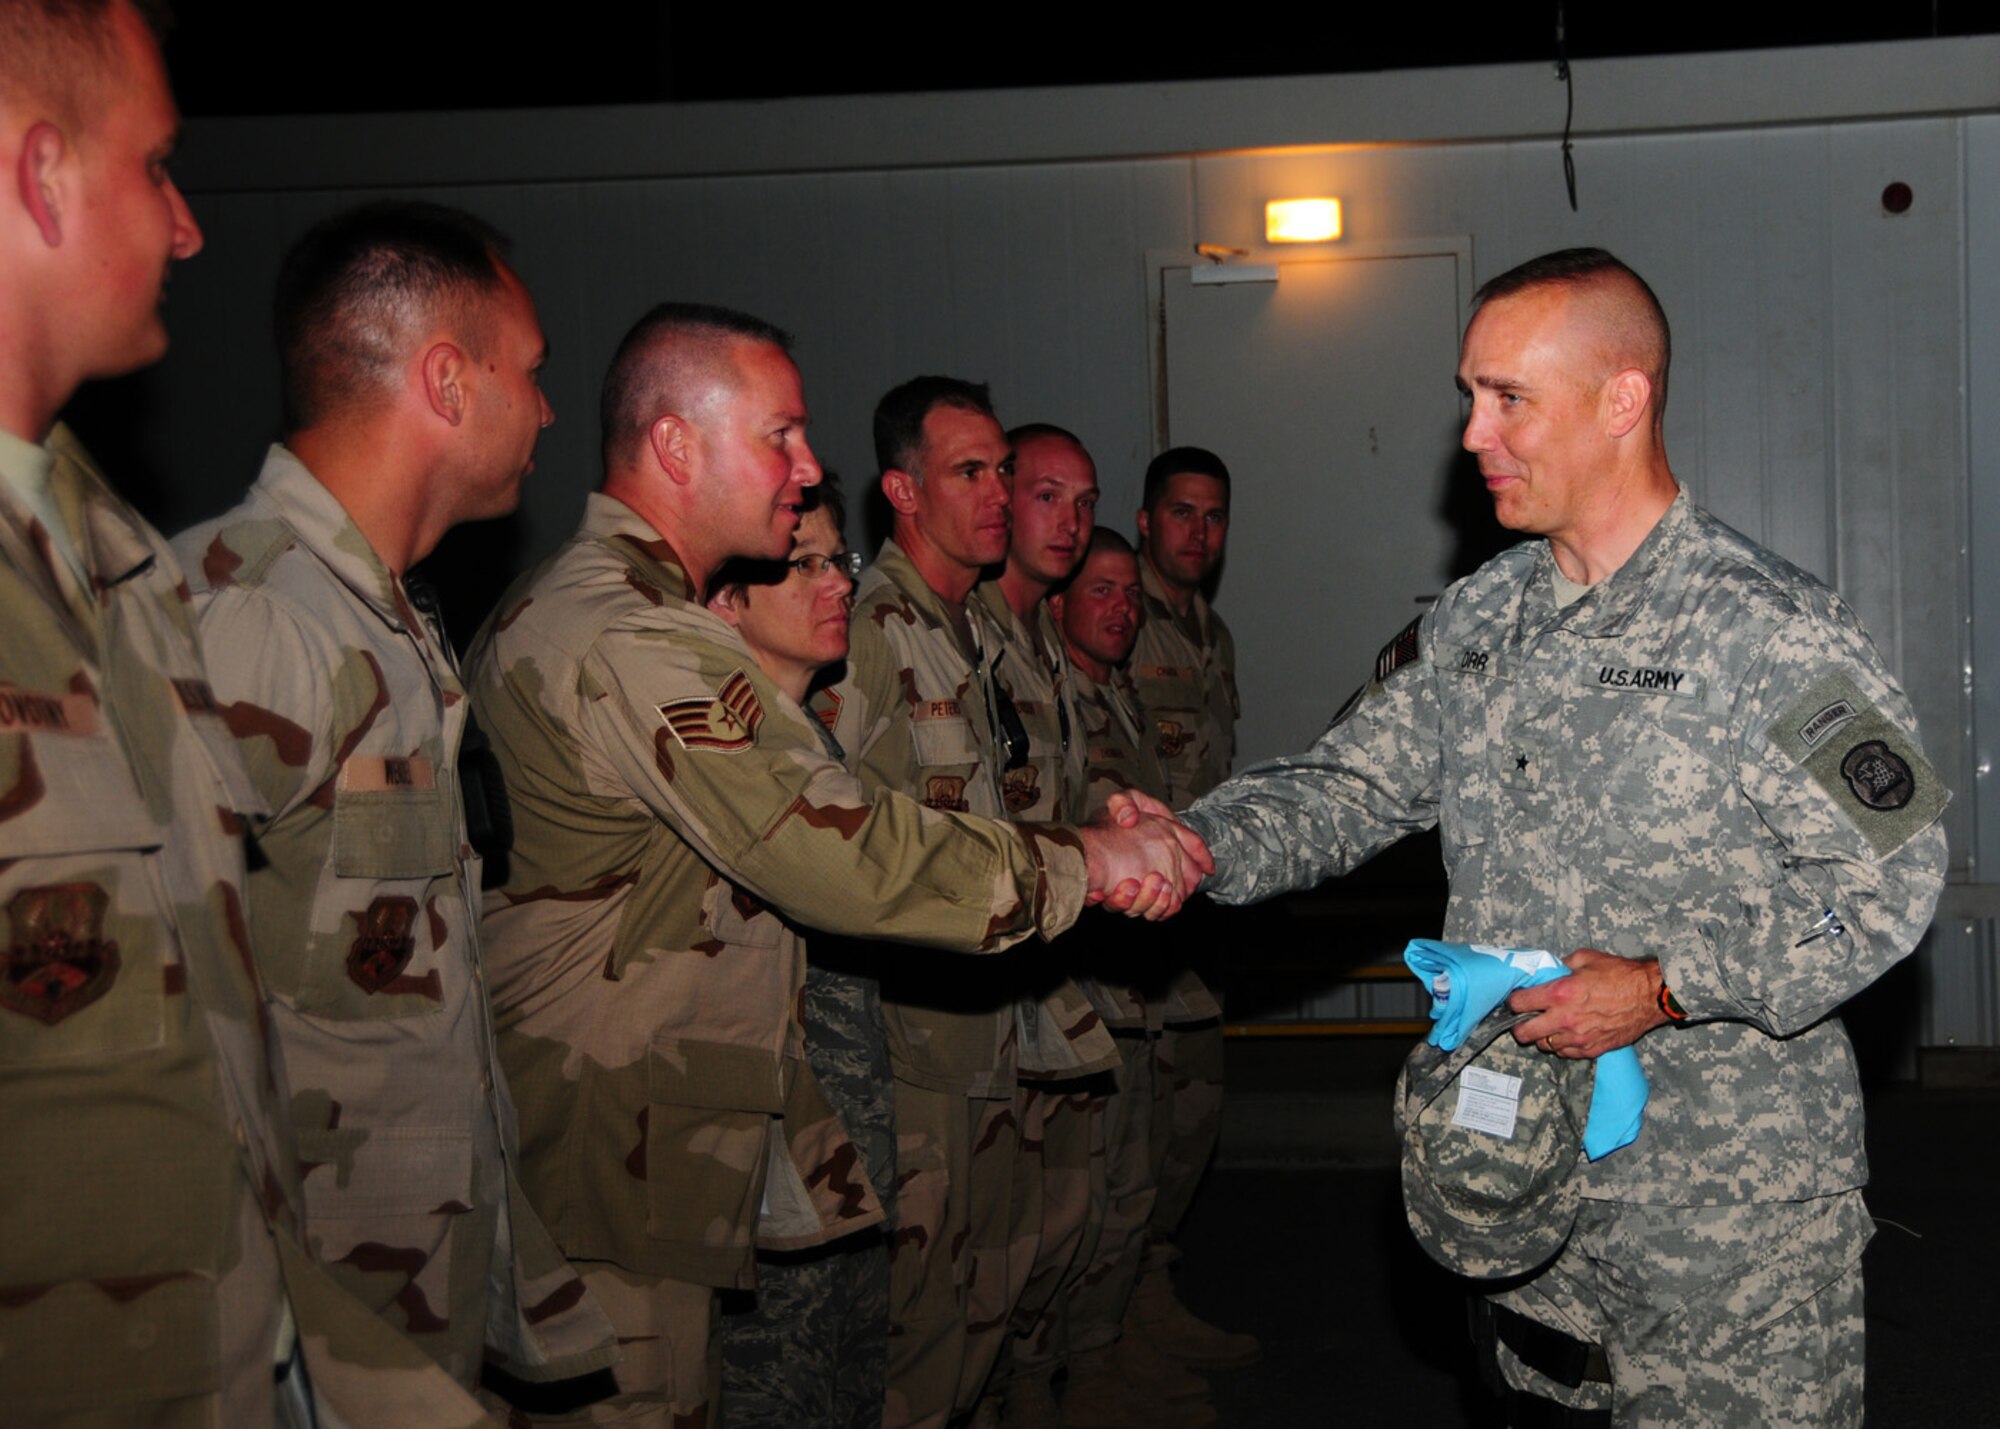 SOUTHWEST ASIA -- Army Brig. Gen. Timothy Orr, 28th Adjutant General of the Iowa National Guard, meets with Airmen from the 386th Air Expeditionary Wing at an air base in Southwest Asia, during his visit through the Area of Responsibility, April 21. General Orr is visiting Guard troops, throughout the AOR from Iowa to find out how they are doing and to give his thanks for their service. (U.S. Air Force photo/ Senior Airman Courtney Richardson)